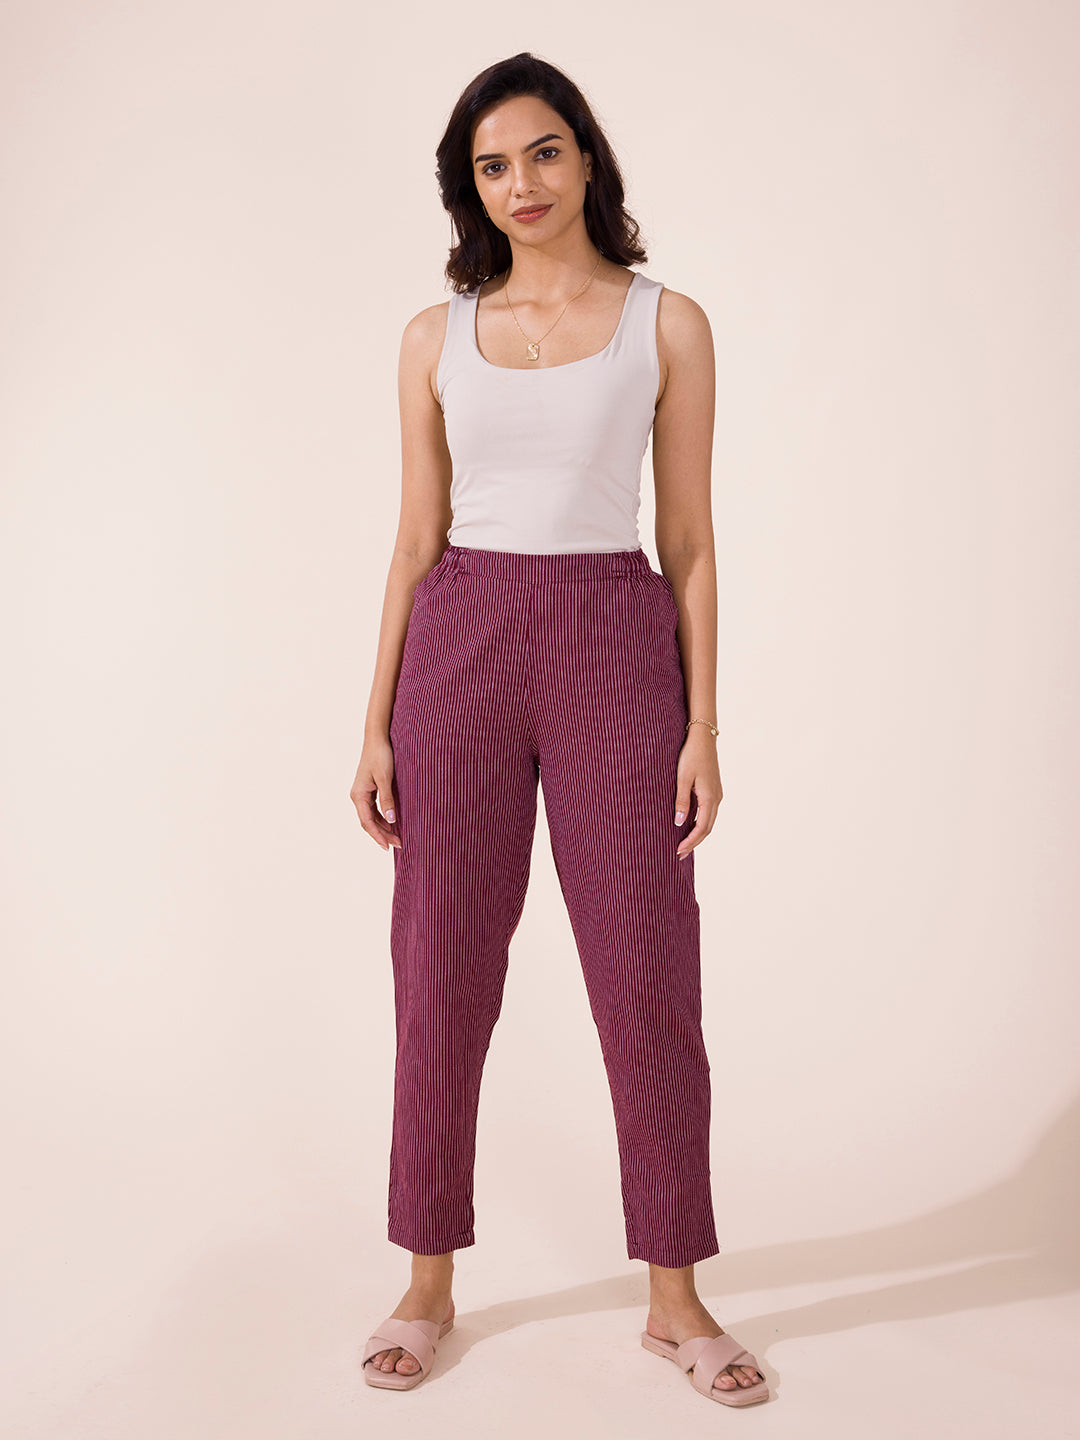 TROUSER PANT / otton Blended Fabric Stretchable Casual Wear Cigarette Pant/Pencil  Pant/Jegging/Trouser for Women